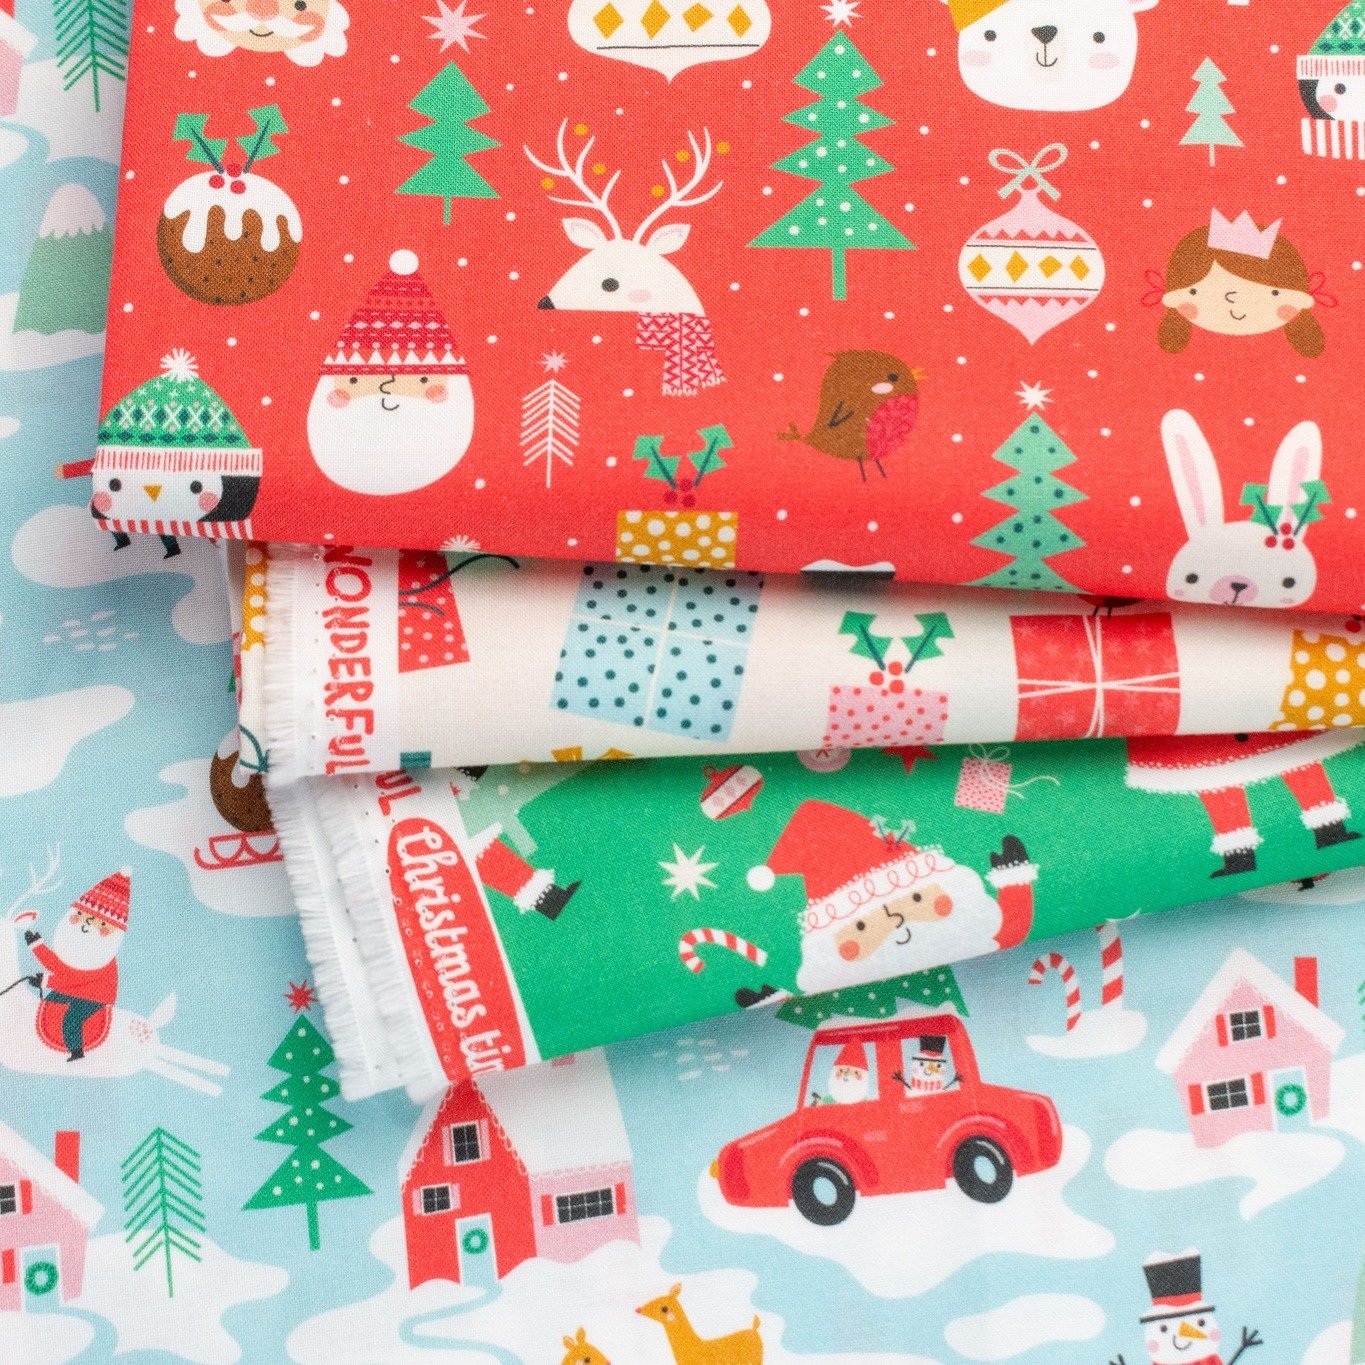 Just a few of the adorable details in the new Wonderful Christmastime collection. Spot Santa and Frosty headed home with a tree! 🔍🎅⛄ Play I spy in person with this cute collection in July!

#MakersGonnaShare #MakersofIG #MakerLife #CreateMakeShare 